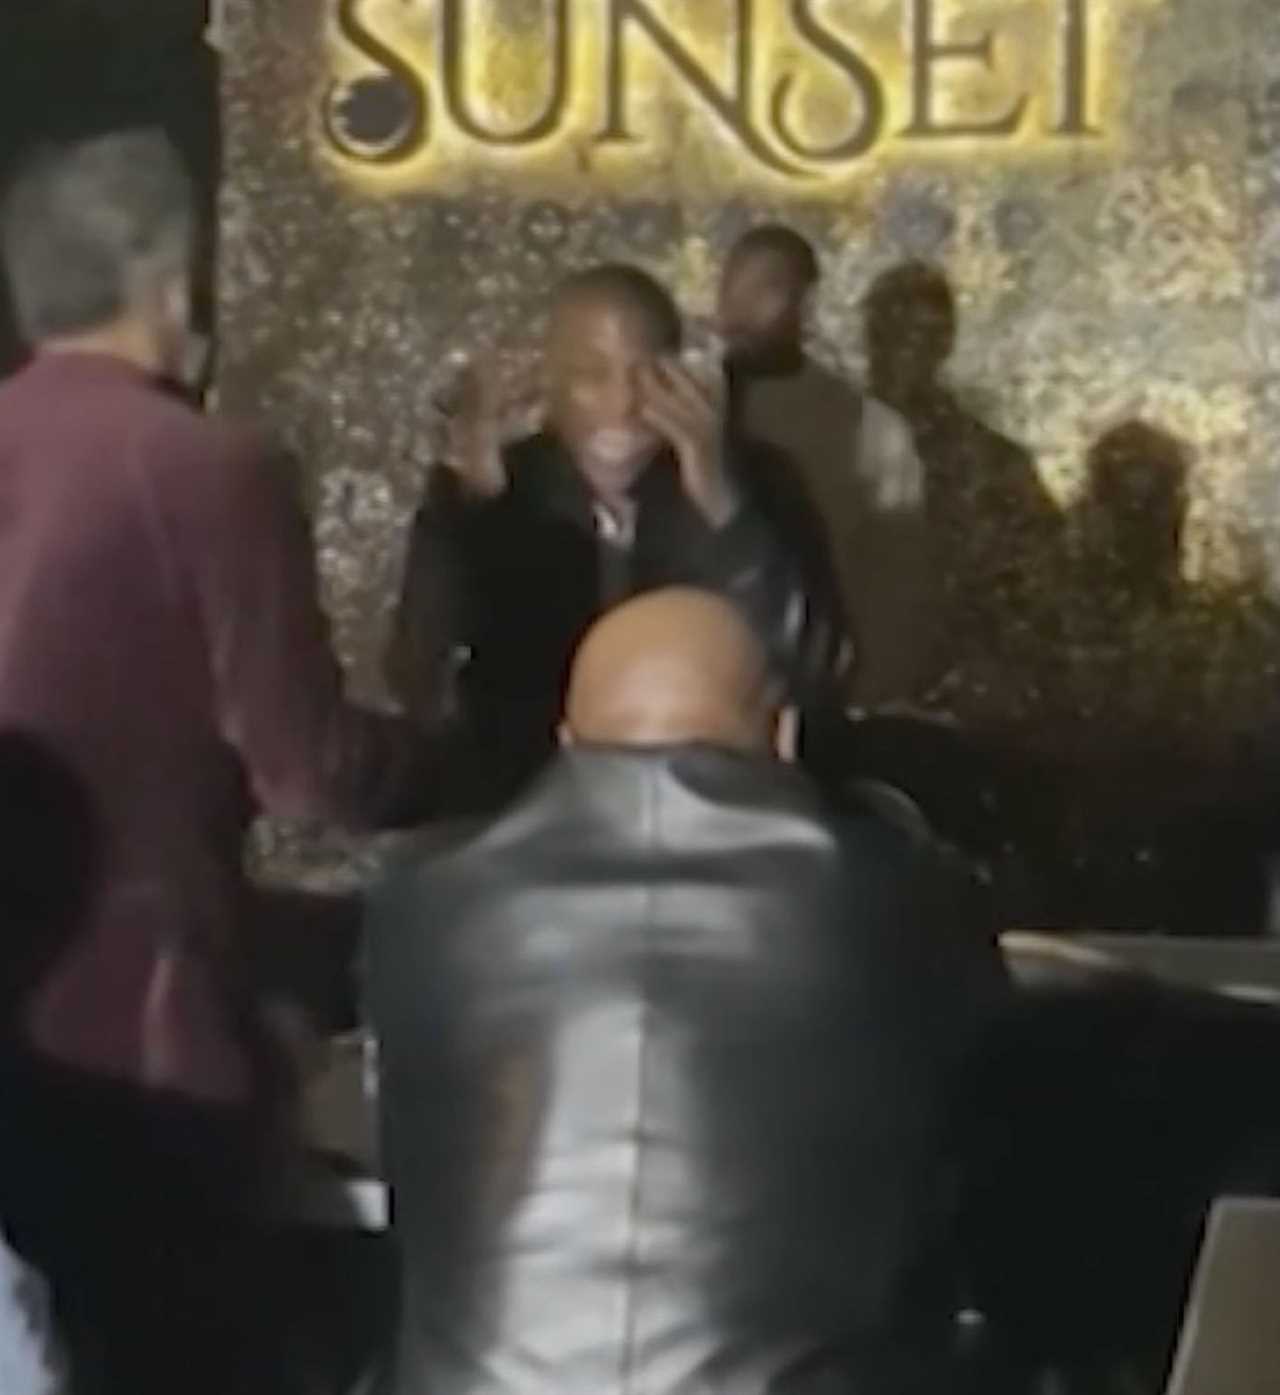 Watch Mike Tyson’s ice-cool reaction after a crazed fan pulls out gun after approaching him at comedy show